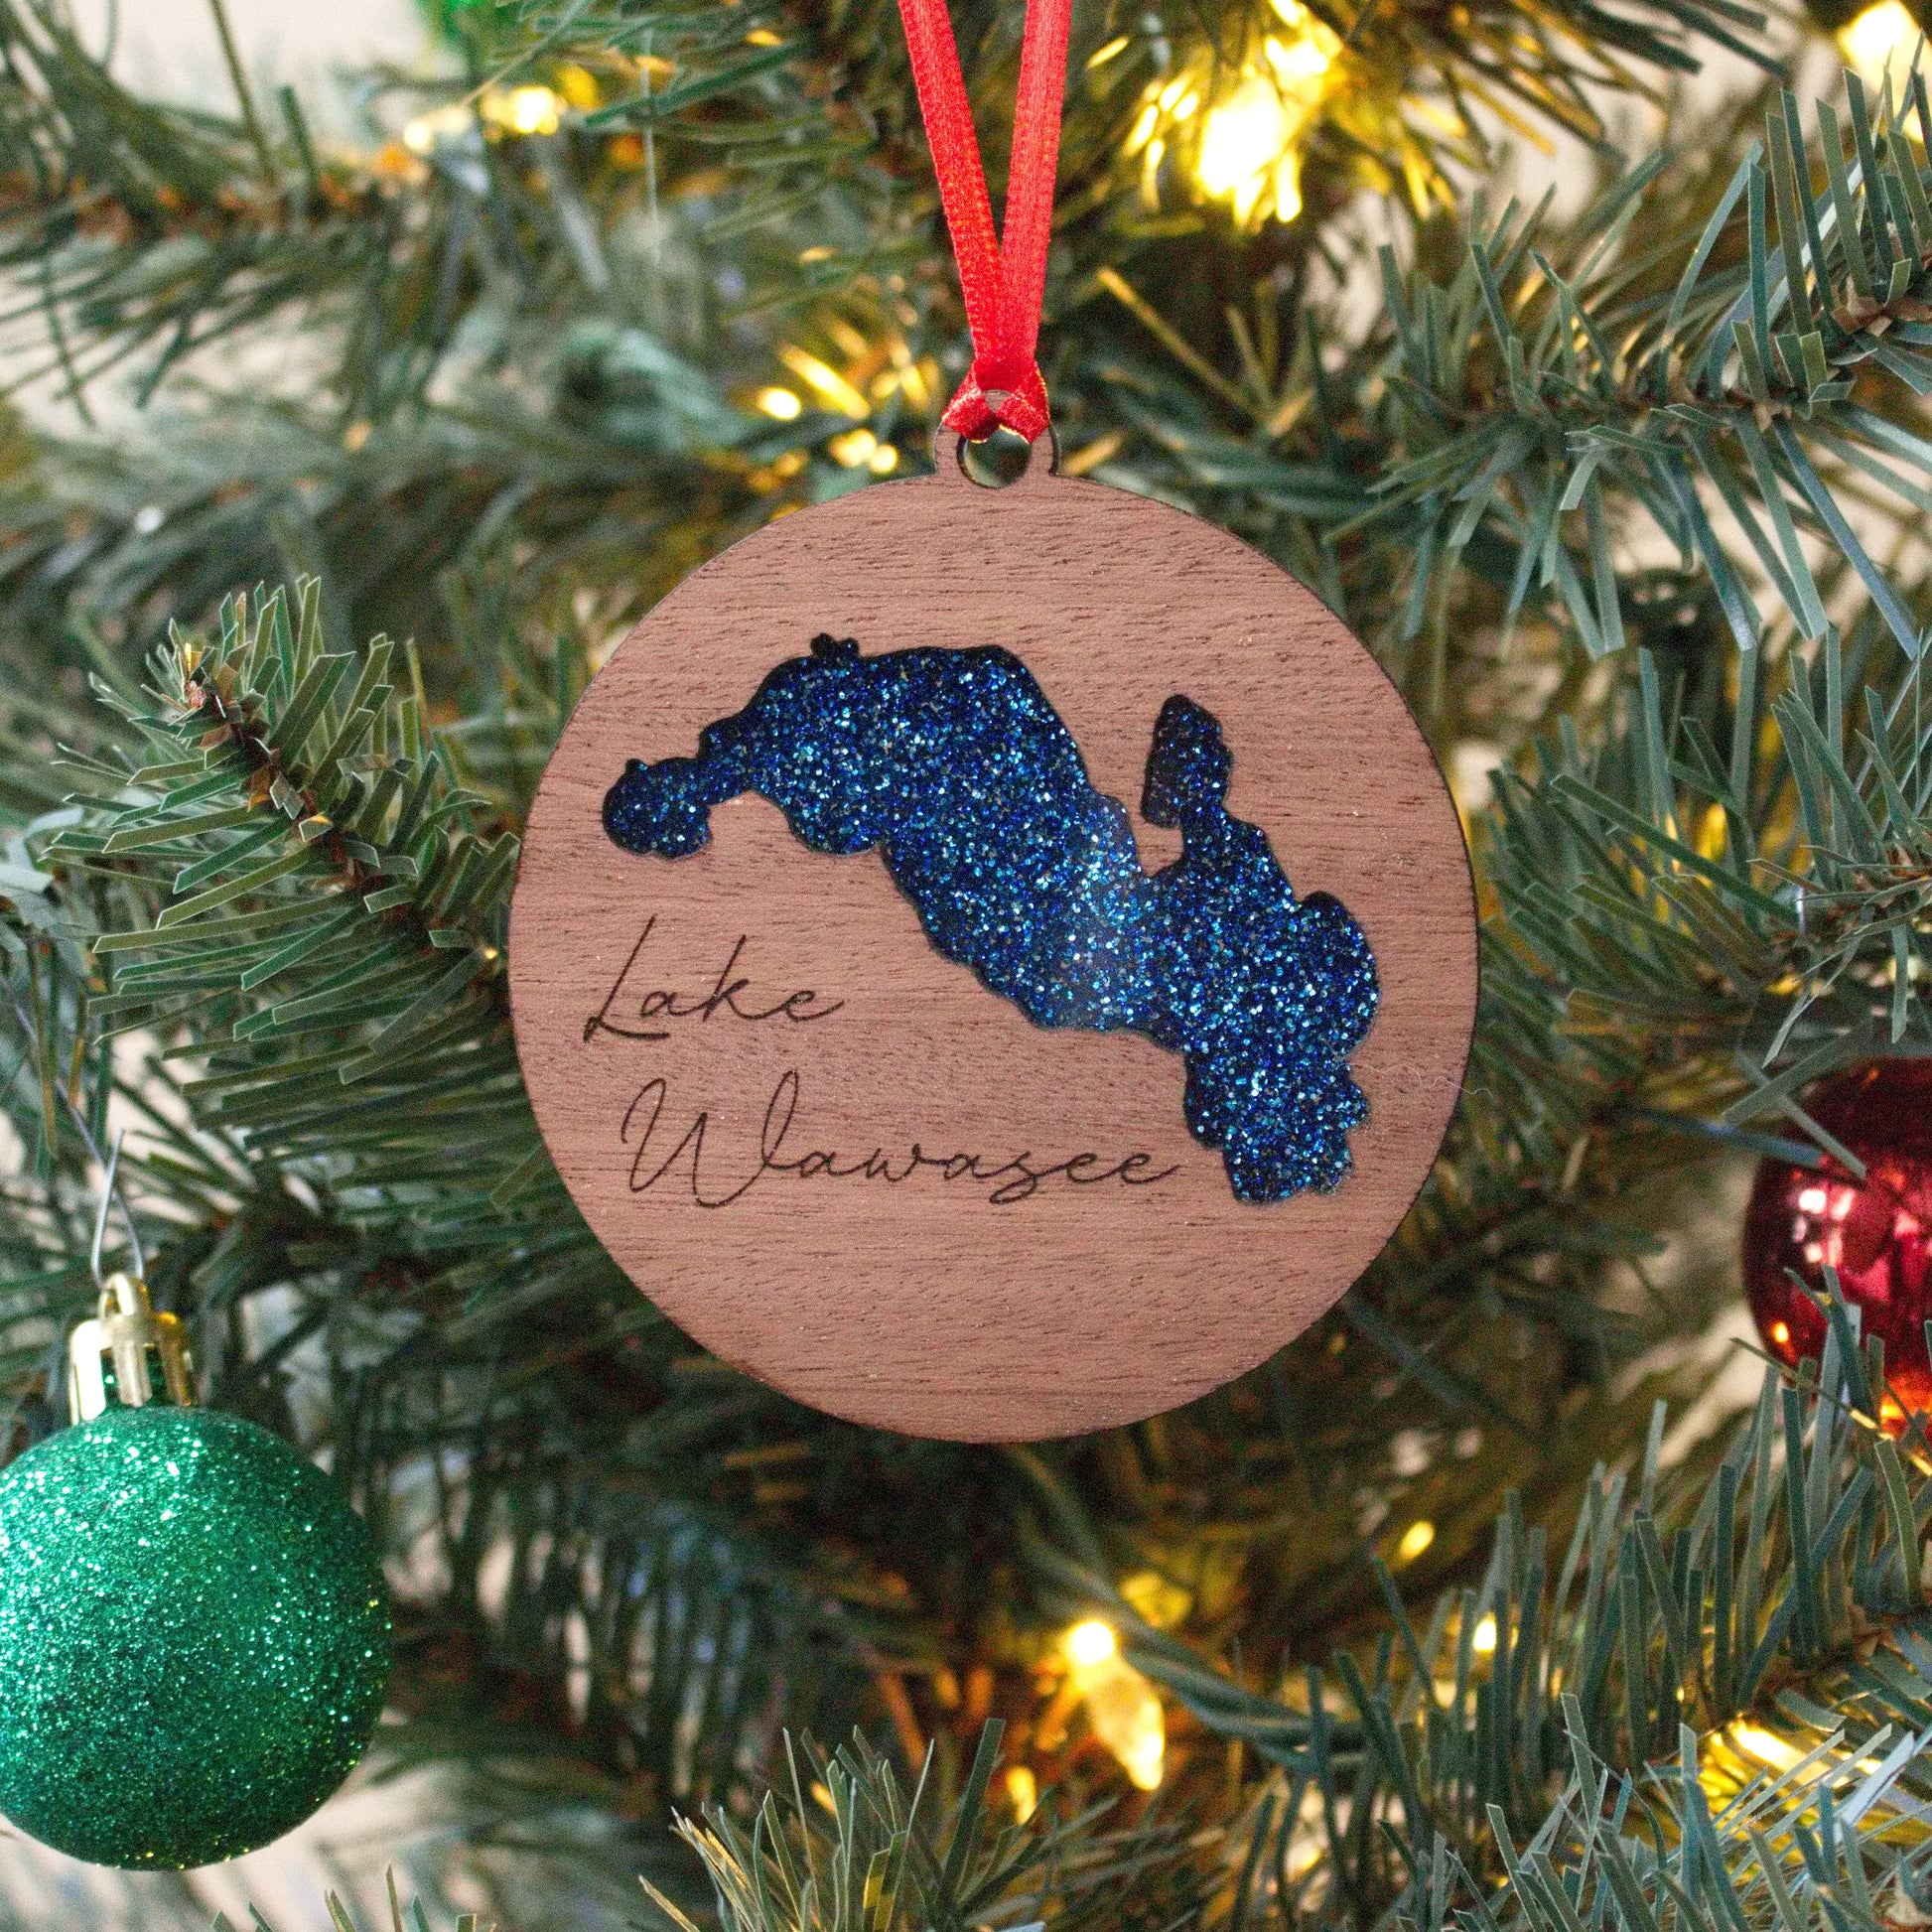 Lake Wawasee Christmas ornament for the family to remember time spent together on the lake. Made out of wood and acrylic with attention to detail. This is something you will love.